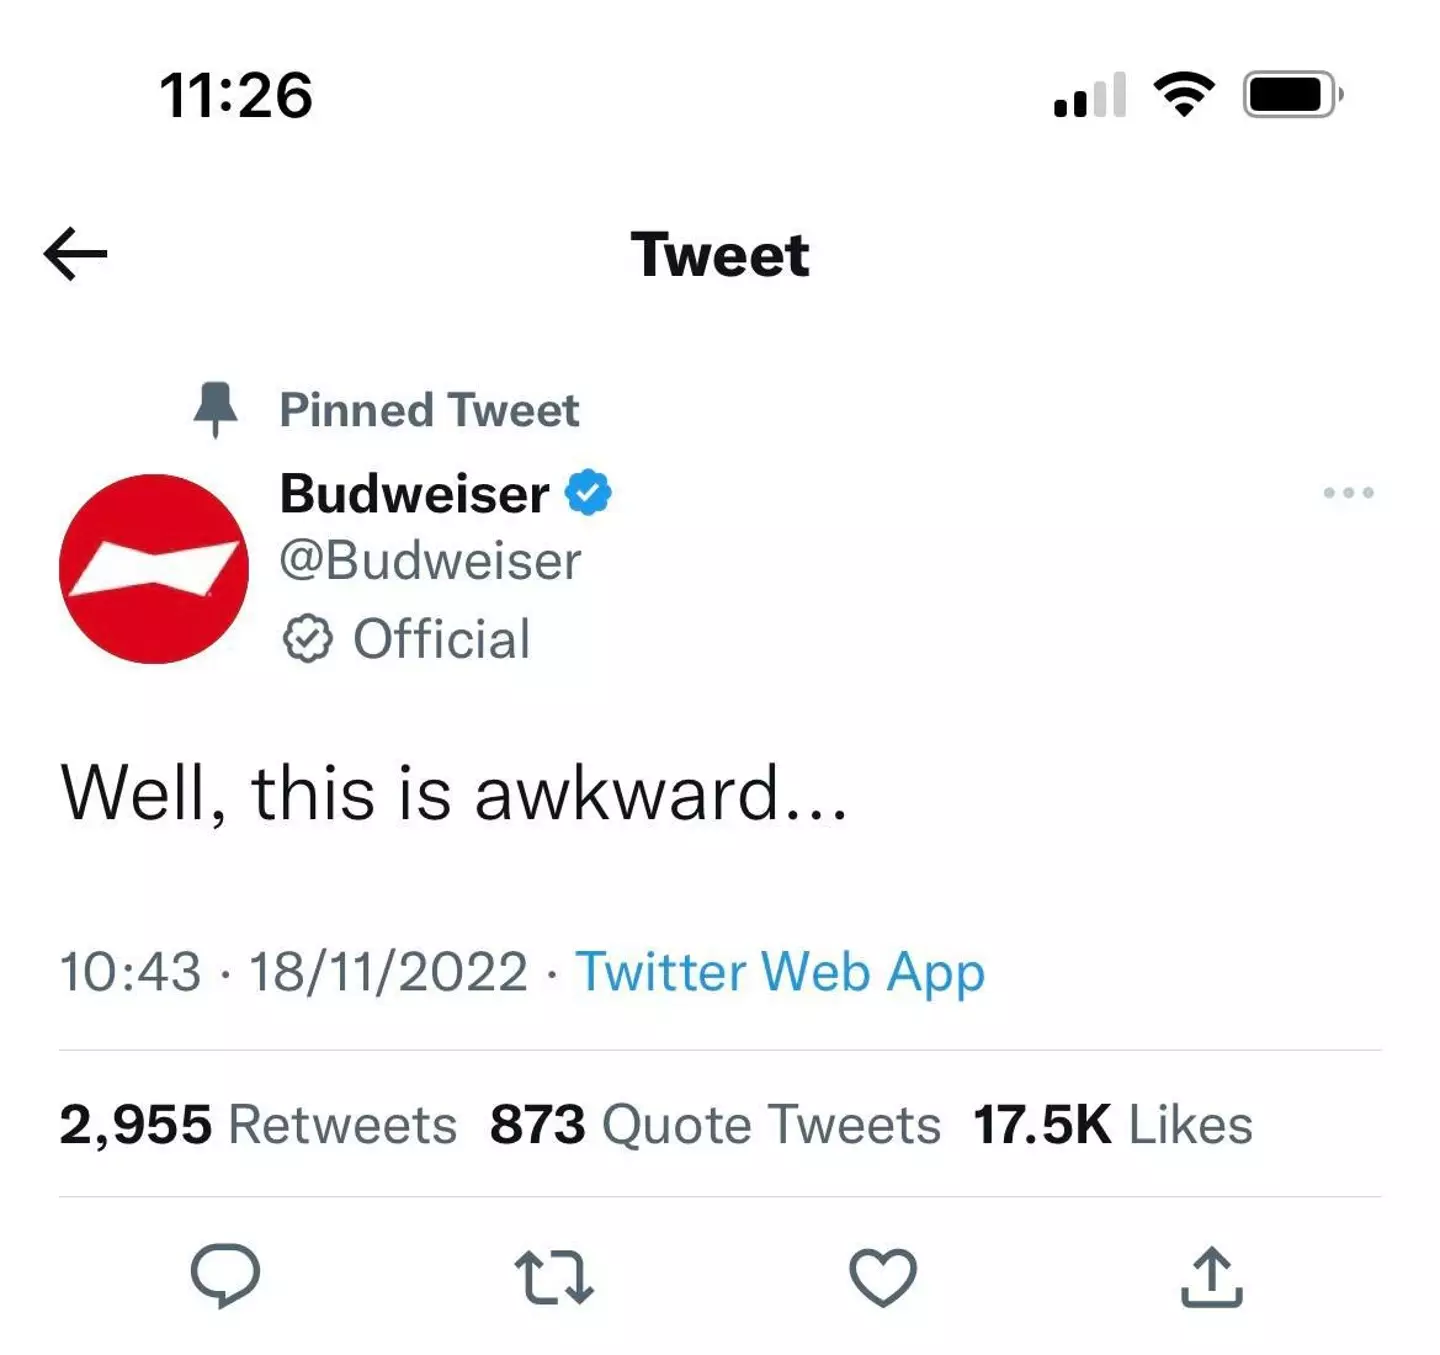 Budweiser have since deleted their tweet in response to alcohol being banned in all World Cup stadiums in Qatar.